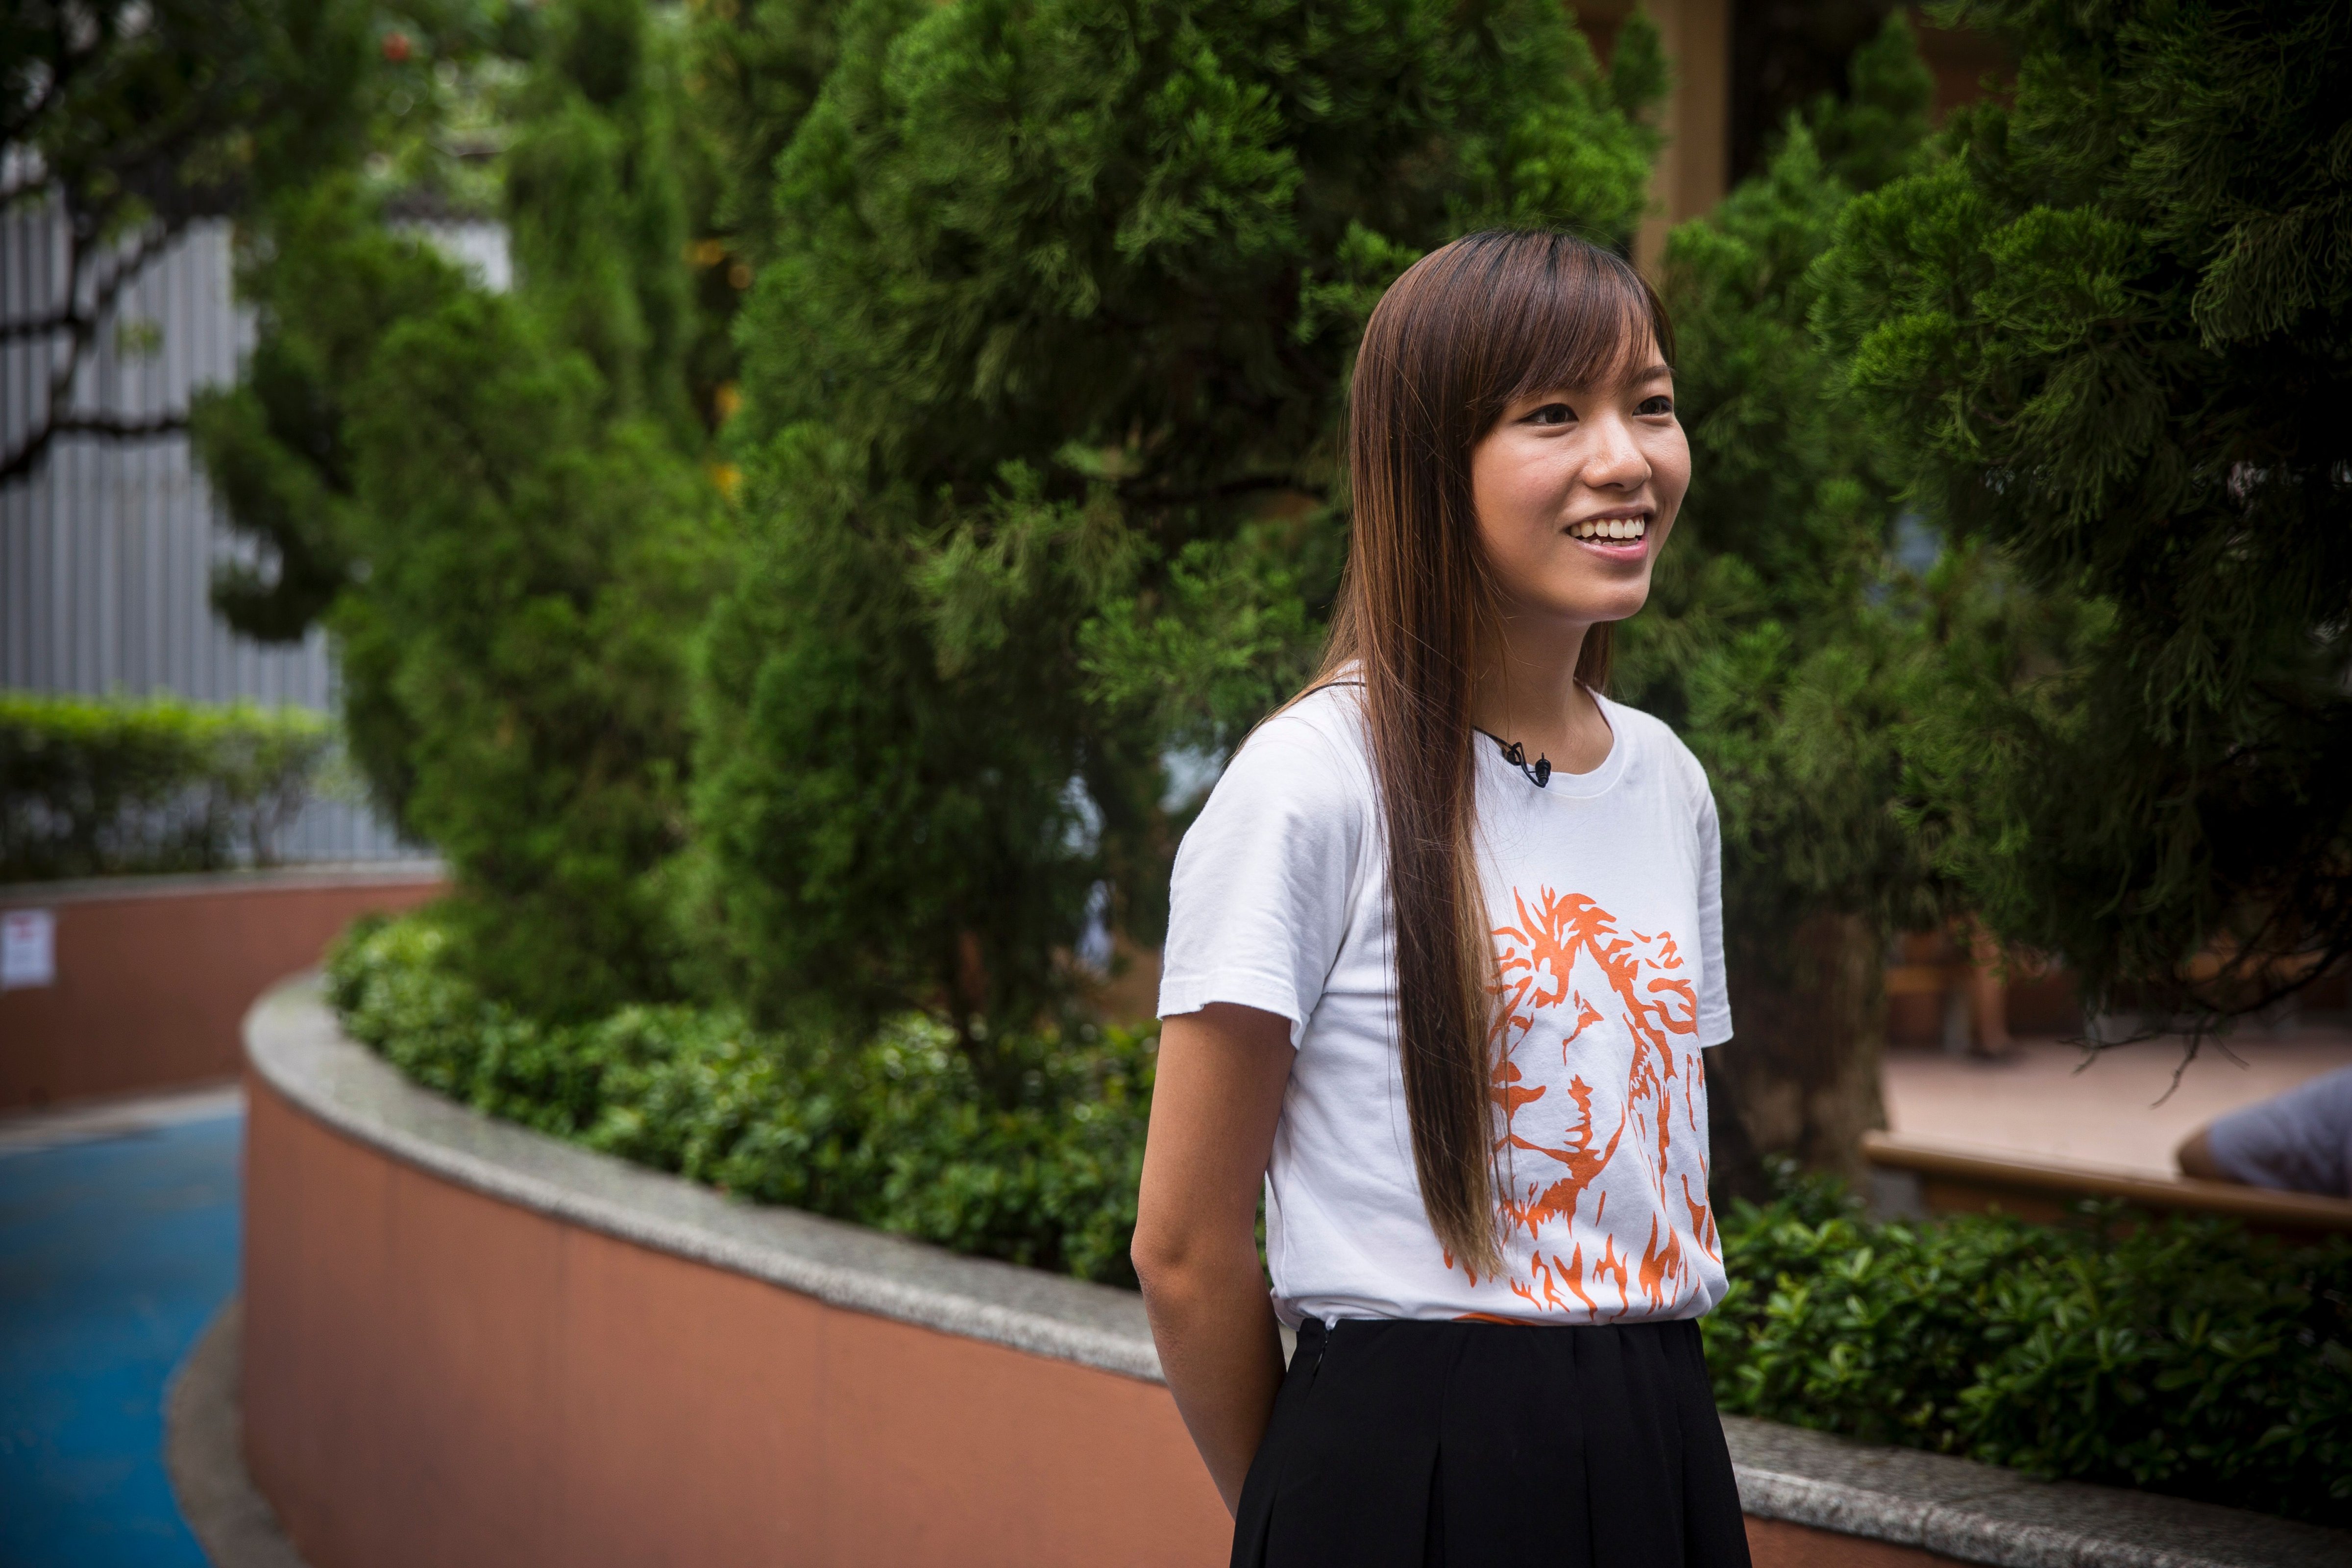 This picture taken on Sept. 15, 2016, shows Yau Wai Ching, from the political party Youngspiration, who was elected to the Hong Kong Legislative Council as a member for West Kowloon in the recent 2016 legislative elections (Isaac Lawrence—AFP/Getty Images)